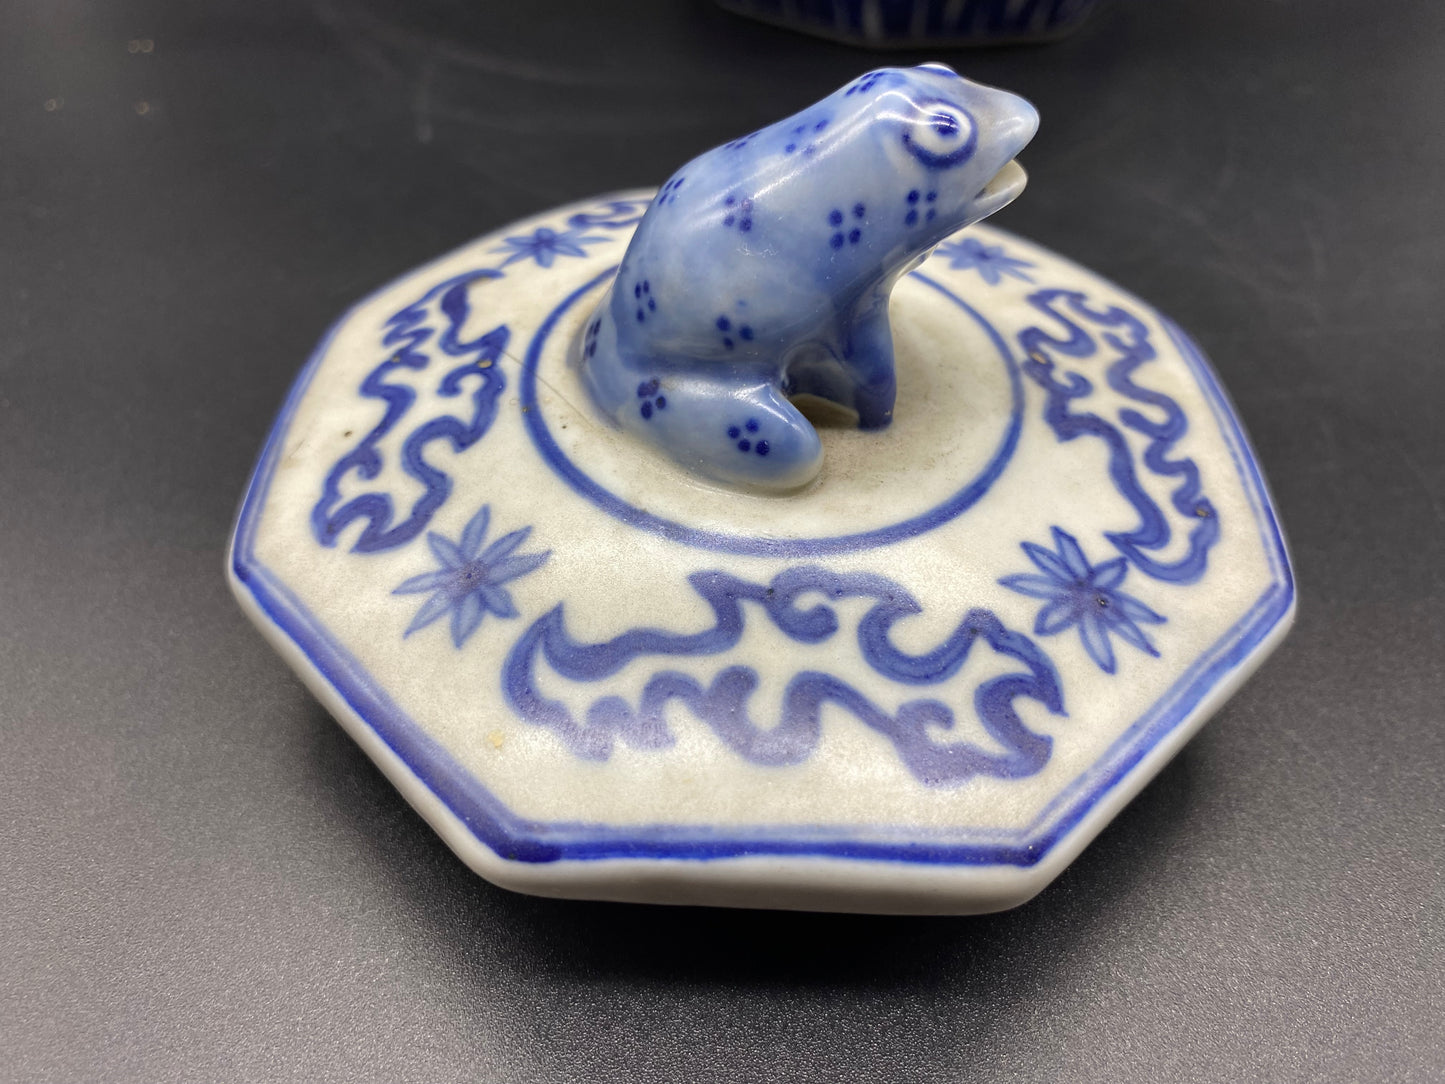 No chips, cracks or repairs. Normal kiln spotting that one should expect from Antique Chinese porcelain.